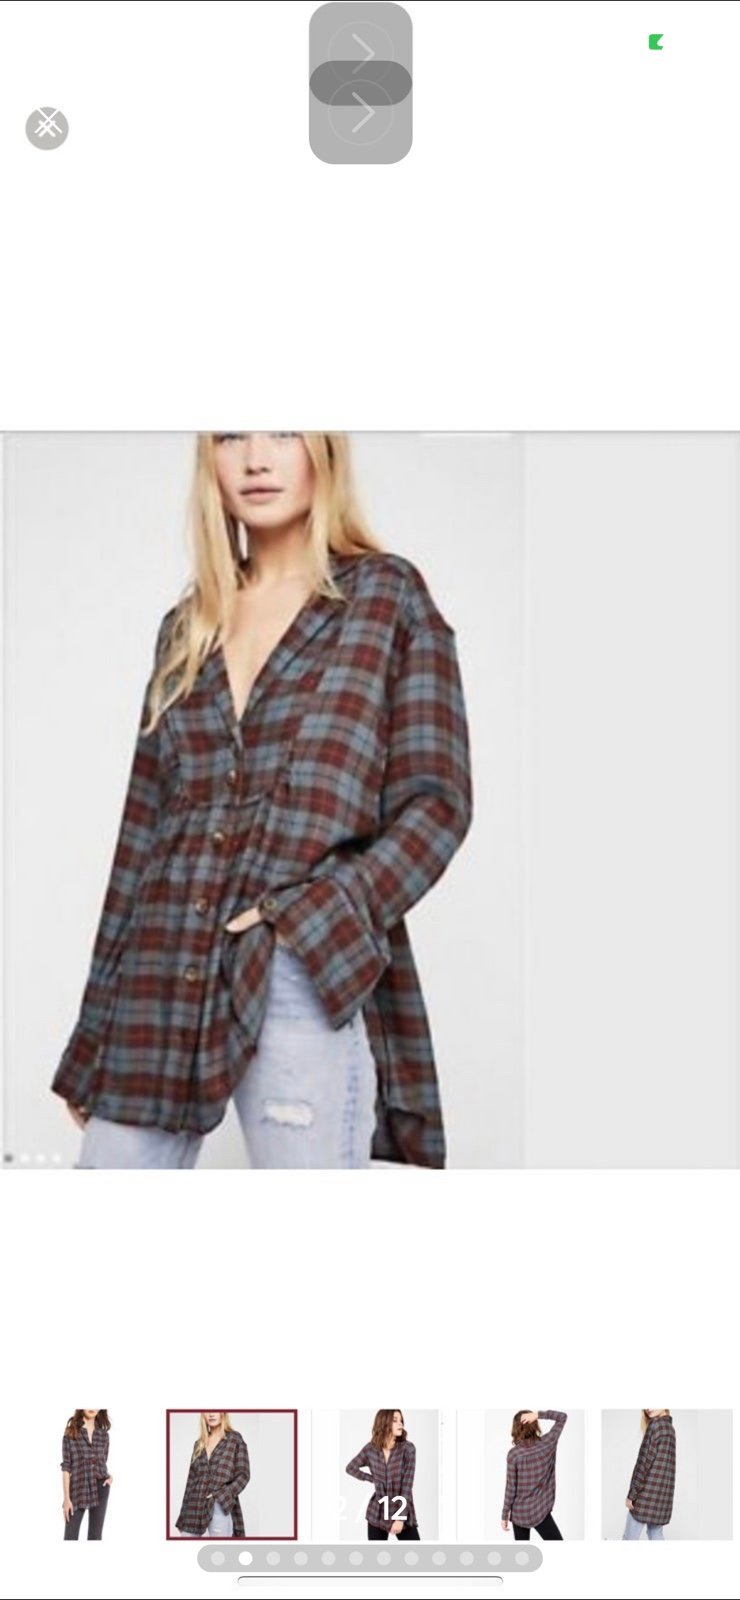 Custom Free People ALL ABOUT THE FEELS PLAID BUTTON DOWN TOP SMALL NEW oLHzR9P9c Discount